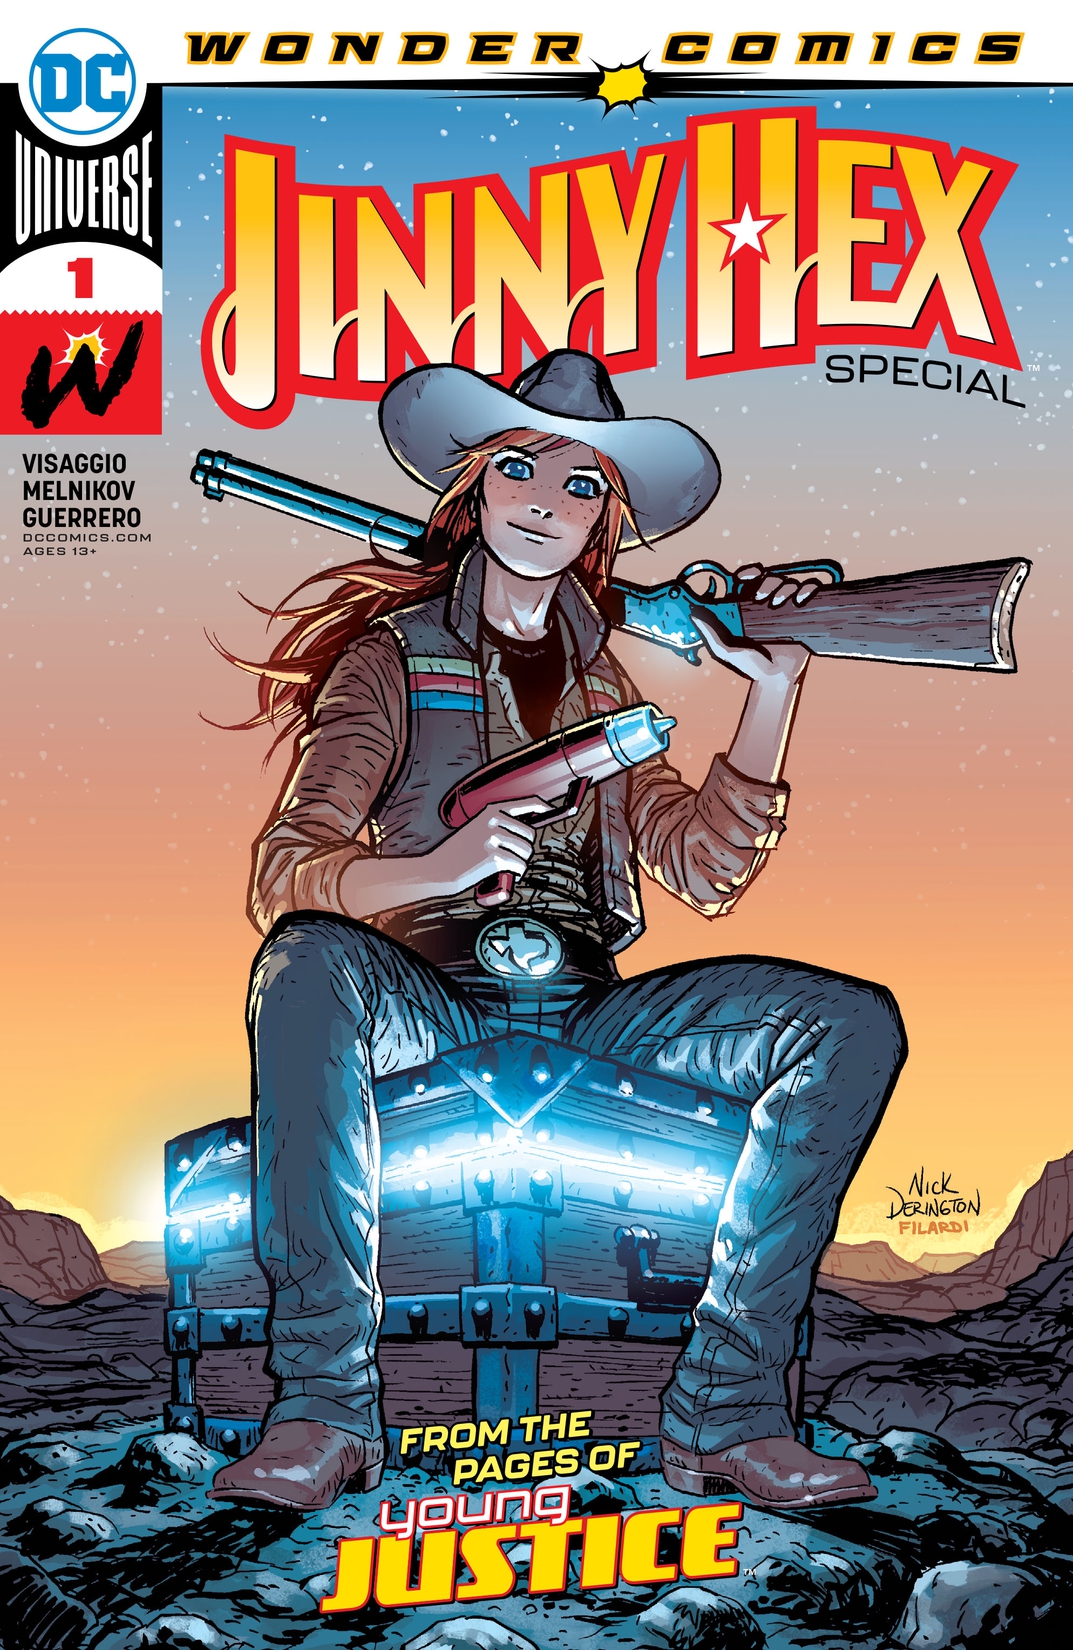 Jinny Hex Special #1 preview images